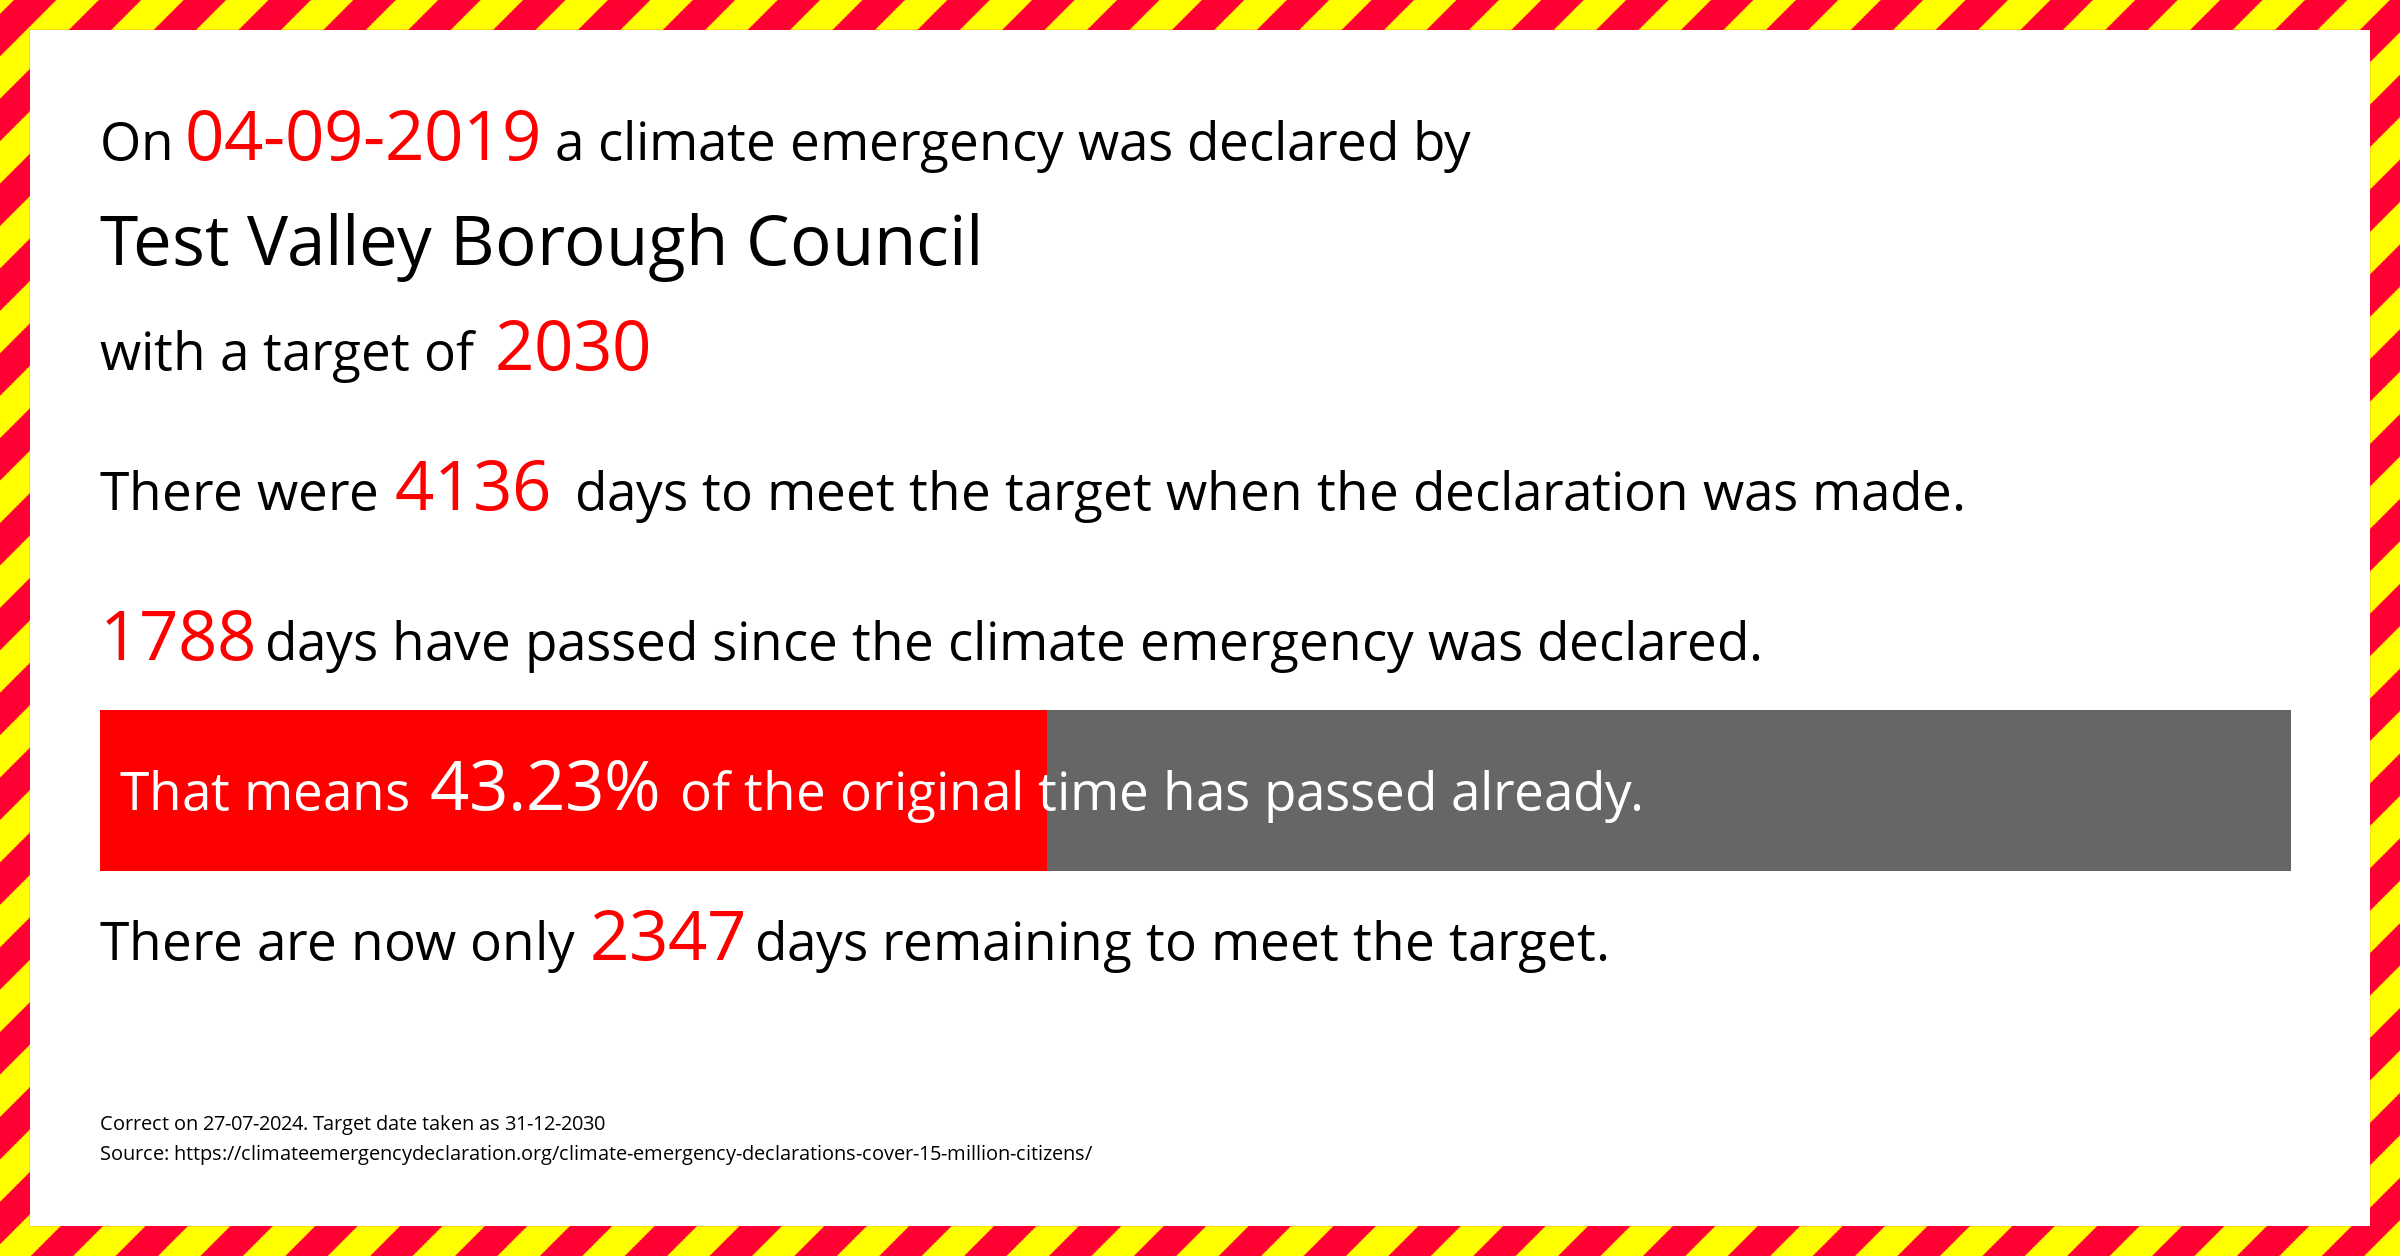 Test Valley Borough Council declared a Climate emergency on Wednesday 4th September 2019, with a target of 2030.